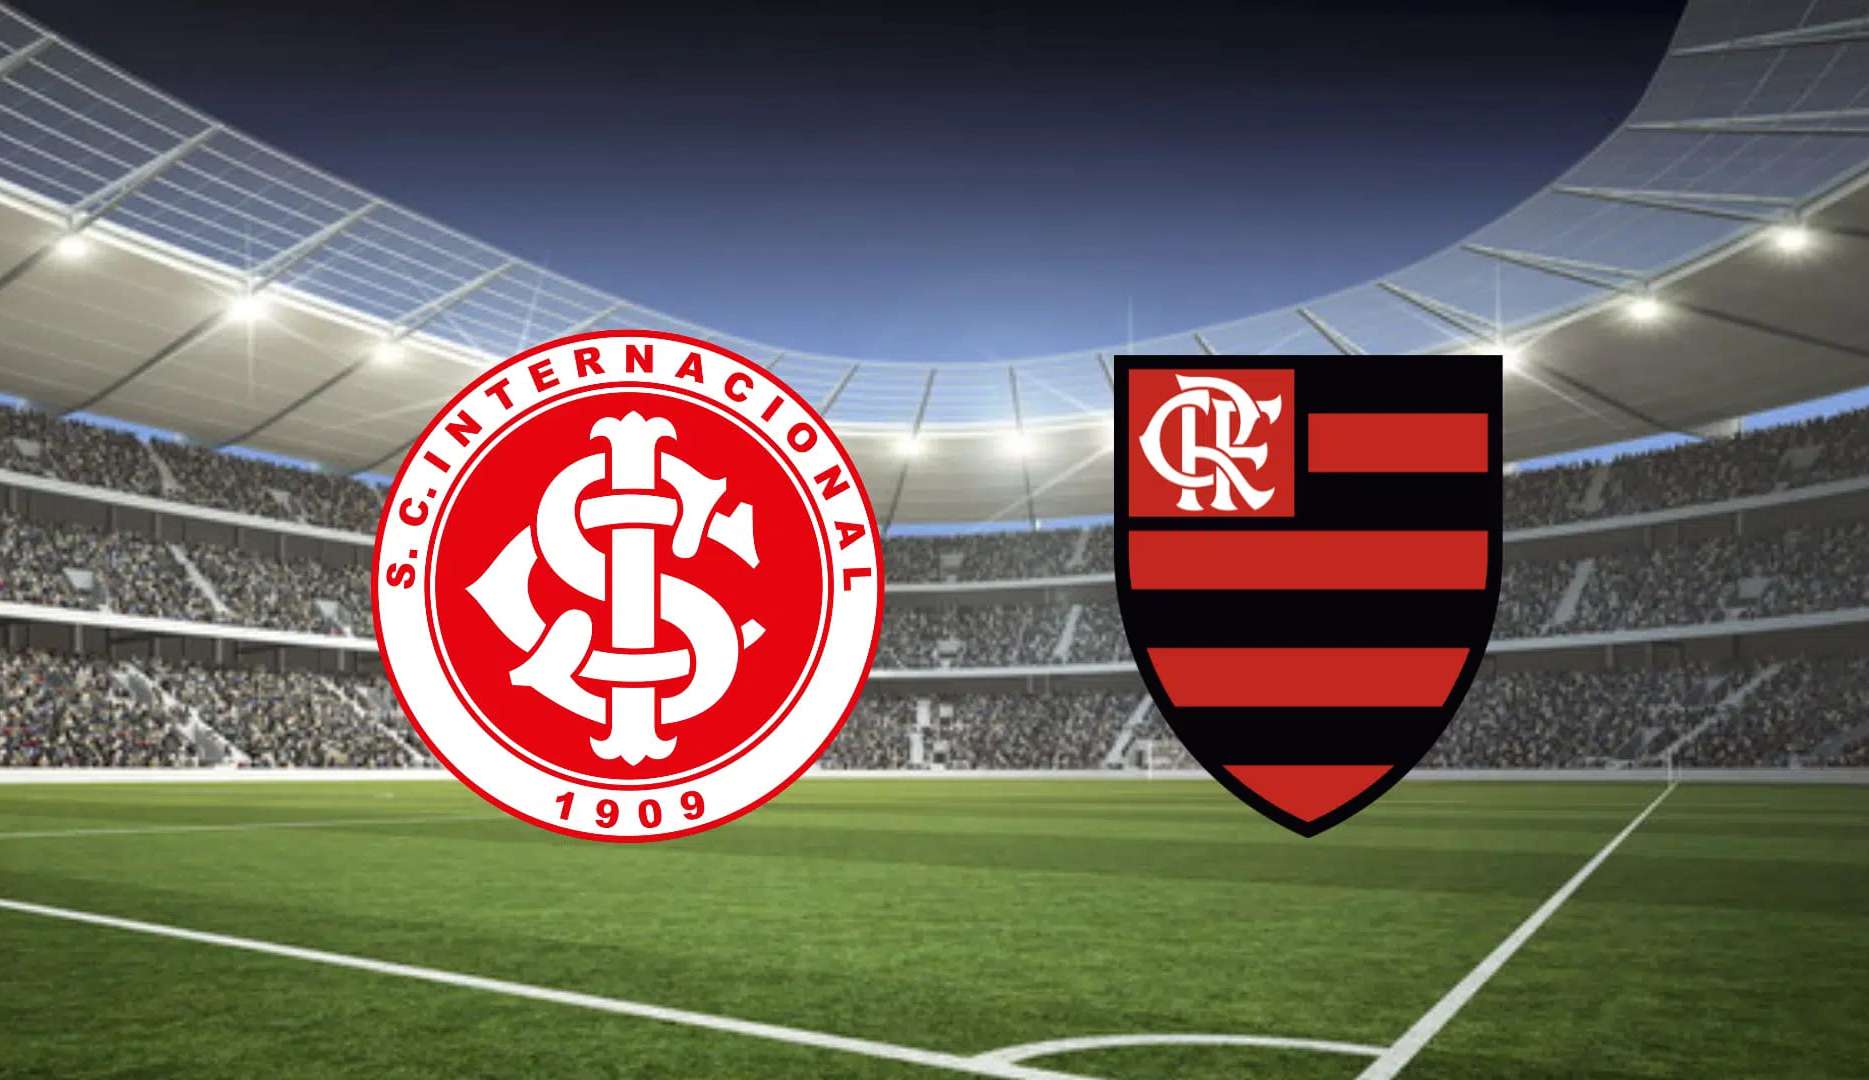 Internacional x Flamengo see where to watch and match details